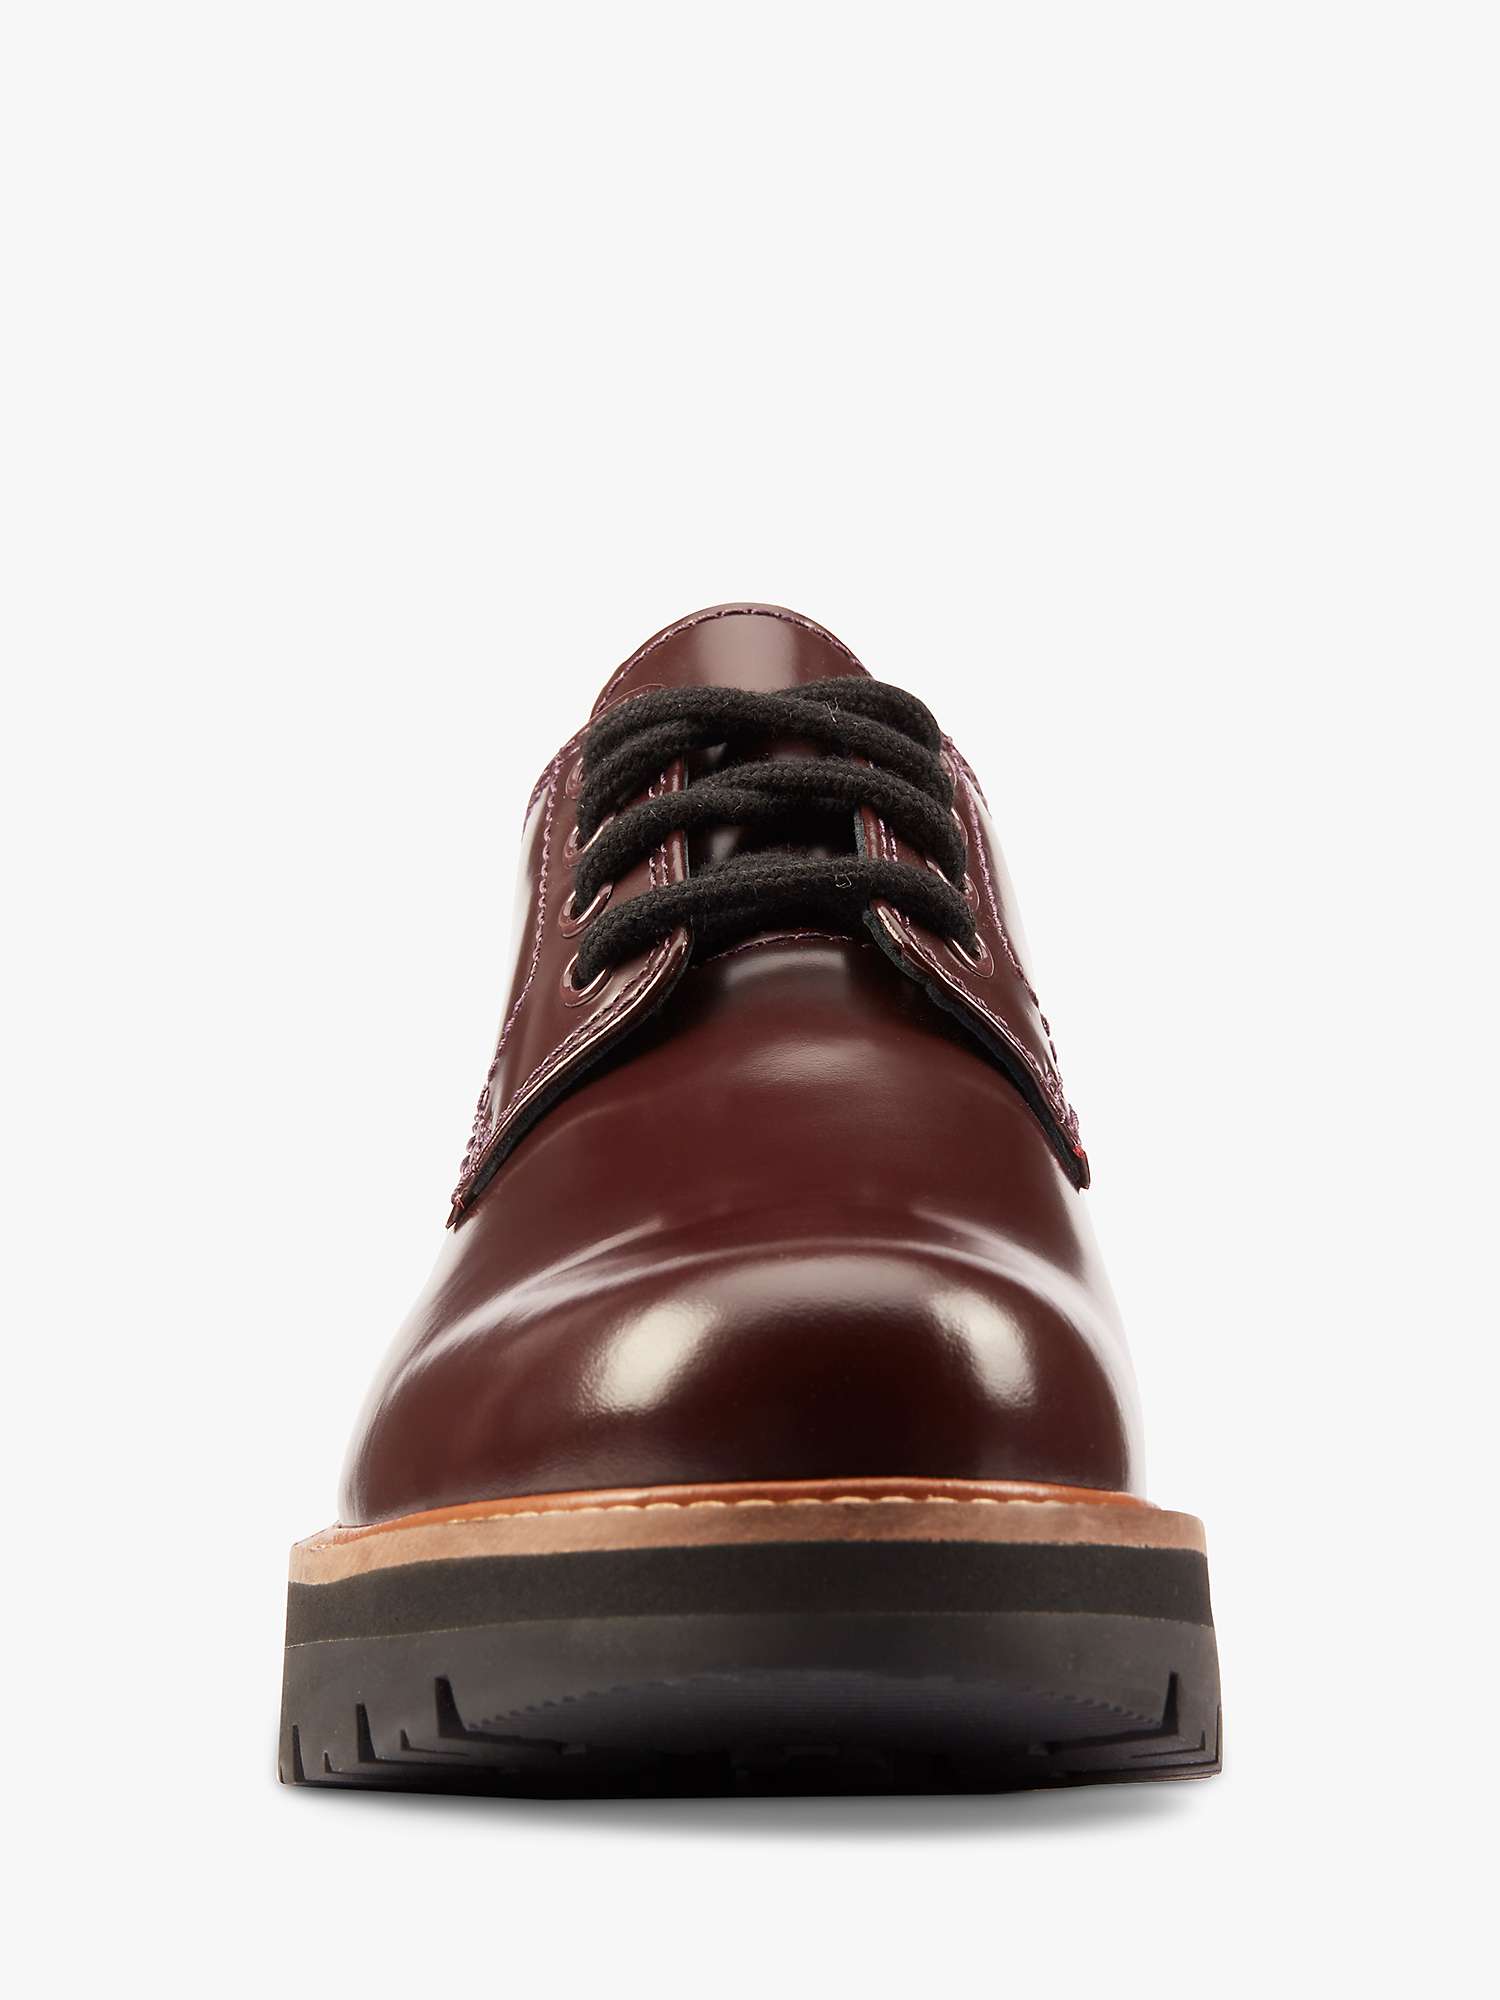 Clarks Orianna Leather Chunky Derby Shoes, Burgundy at John Lewis ...